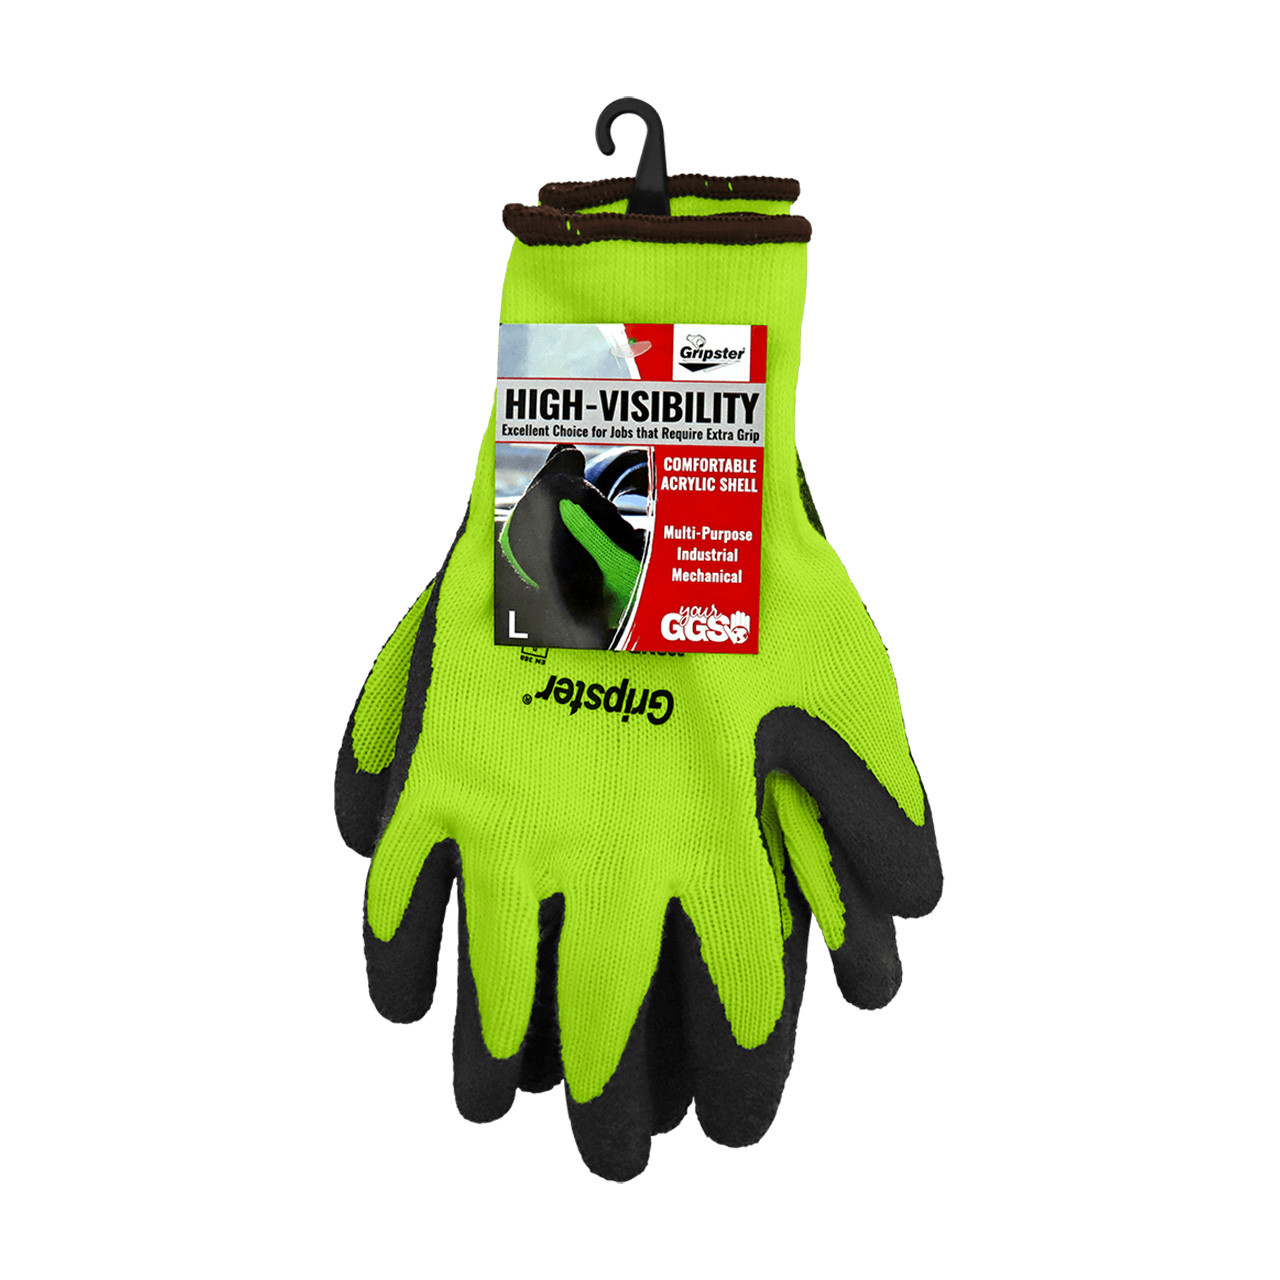 Gripster® Cut, Abrasion, and Puncture Resistant High-Visibility